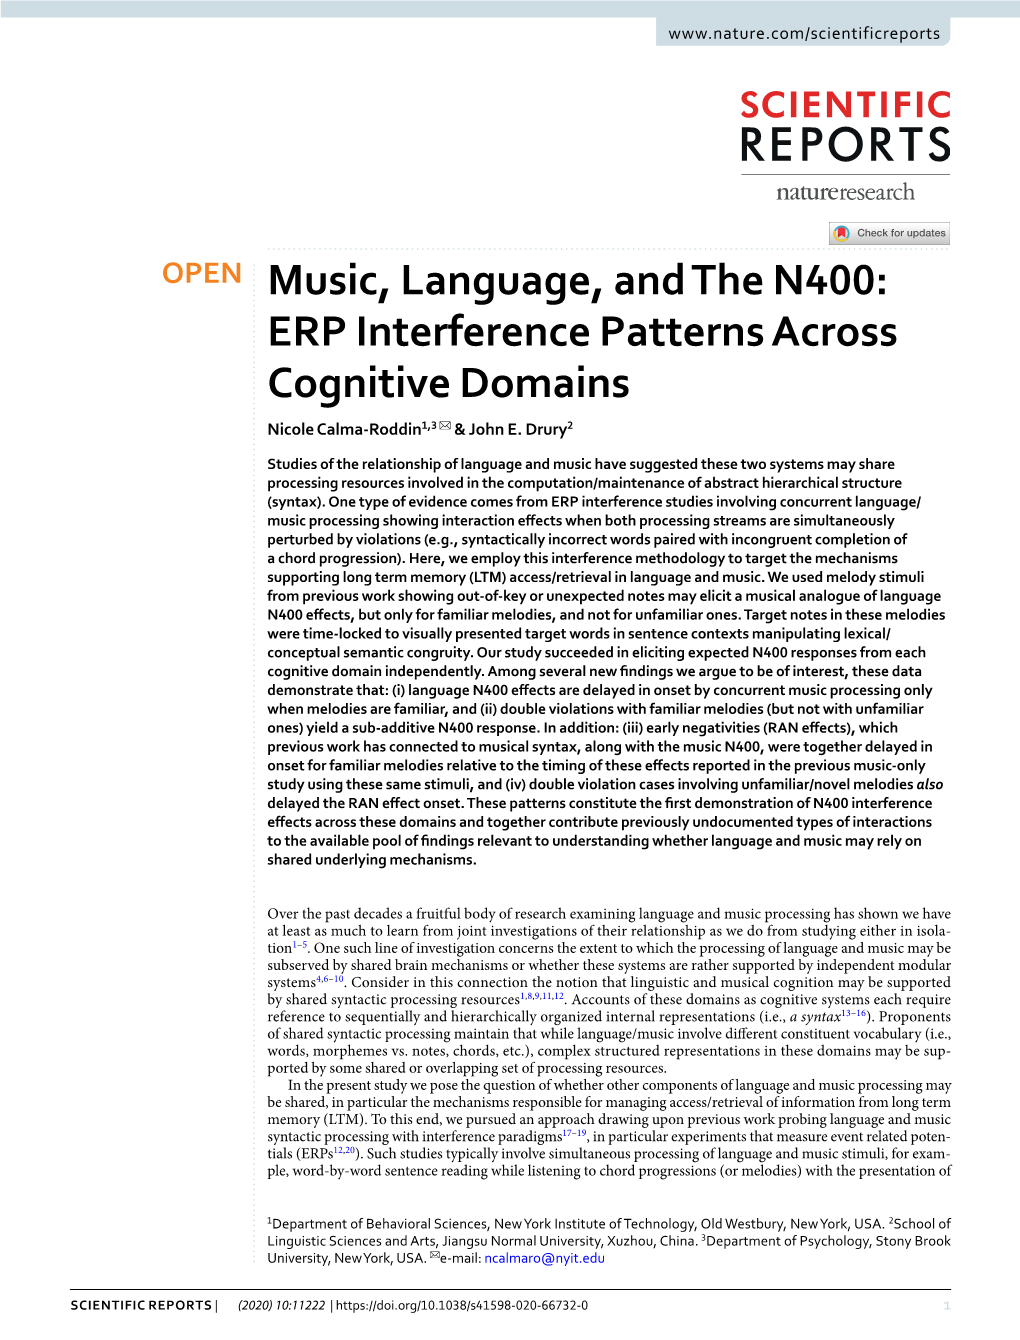 Music, Language, and the N400: ERP Interference Patterns Across Cognitive Domains Nicole Calma-Roddin1,3 ✉ & John E